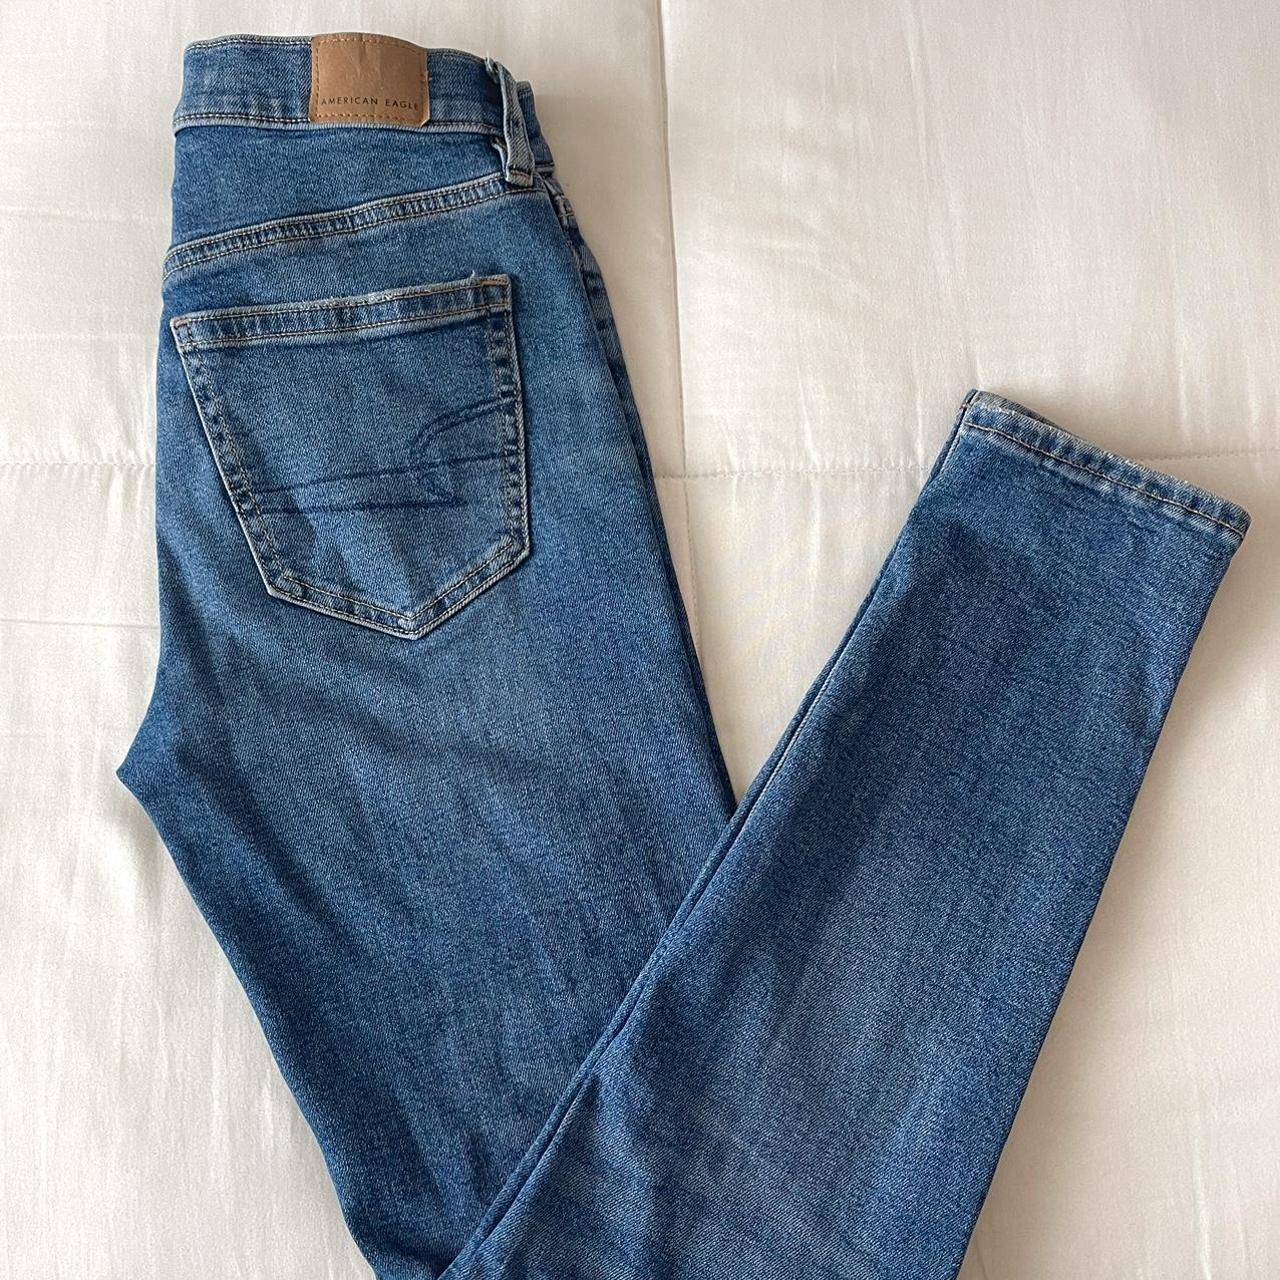 ON HOLD american eagle jeans! great quality denim, - Depop